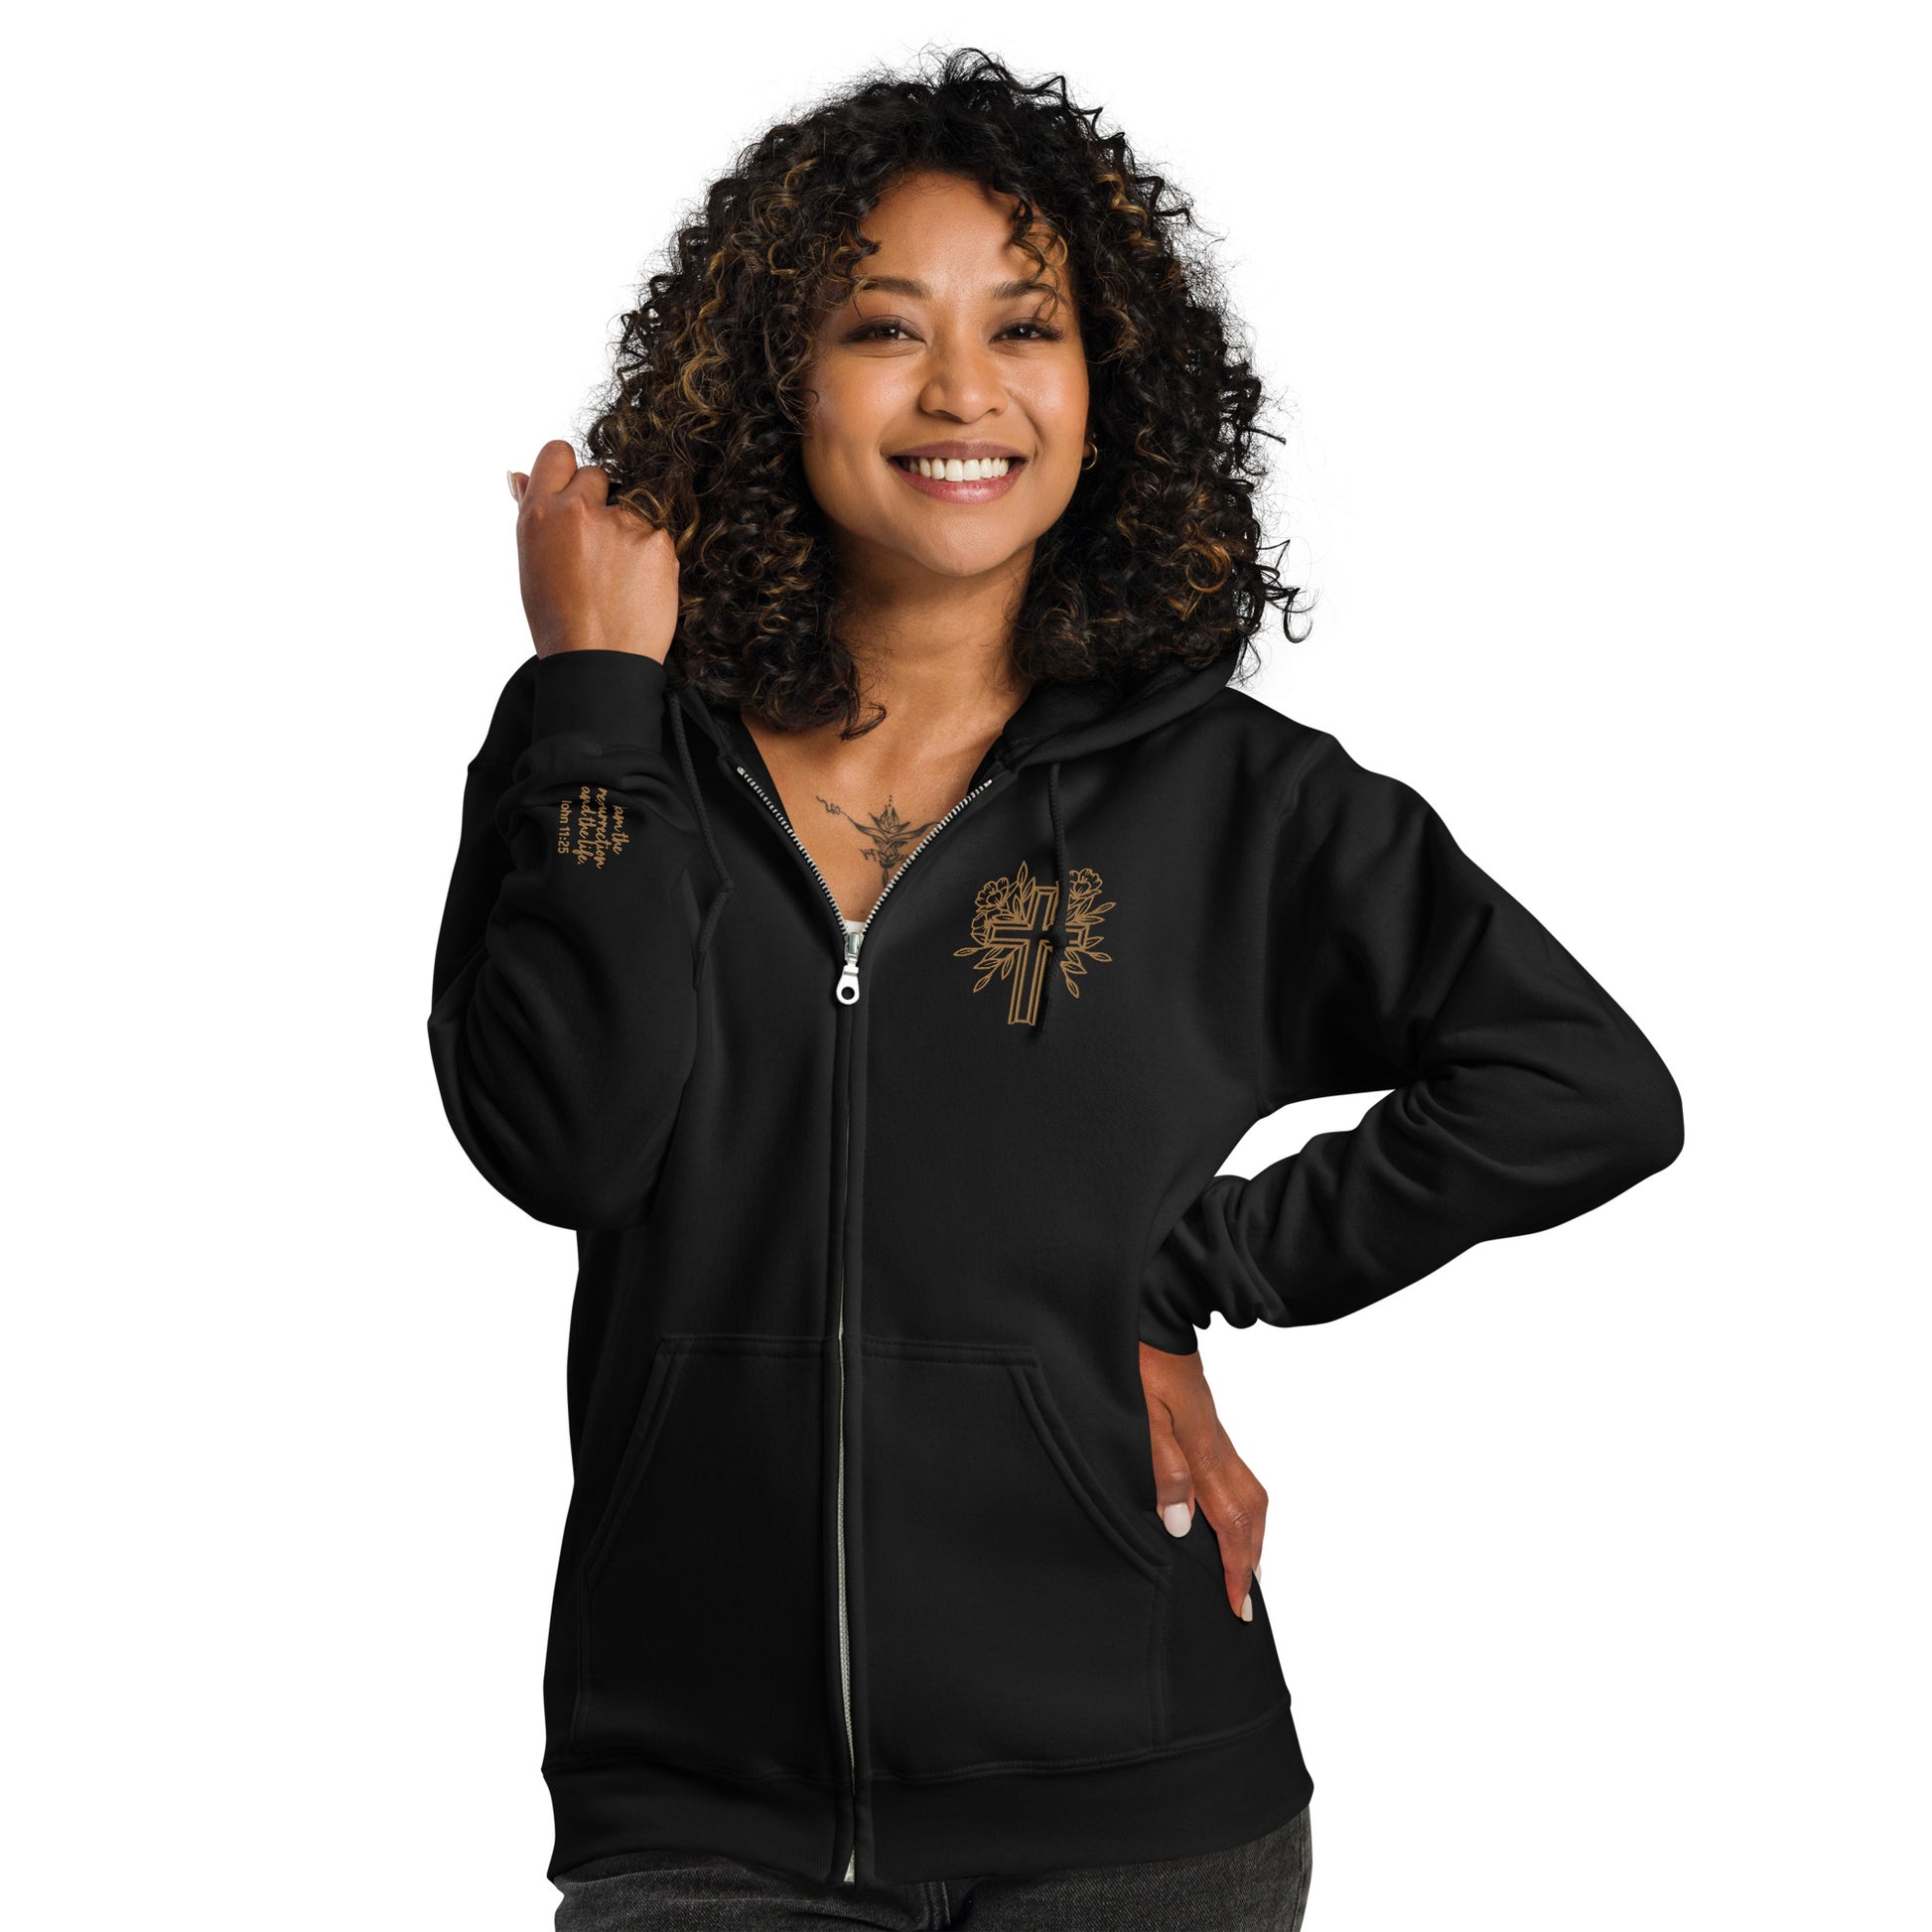 He is Risen Embroidered Zip Hoodie - Friends of the Faith